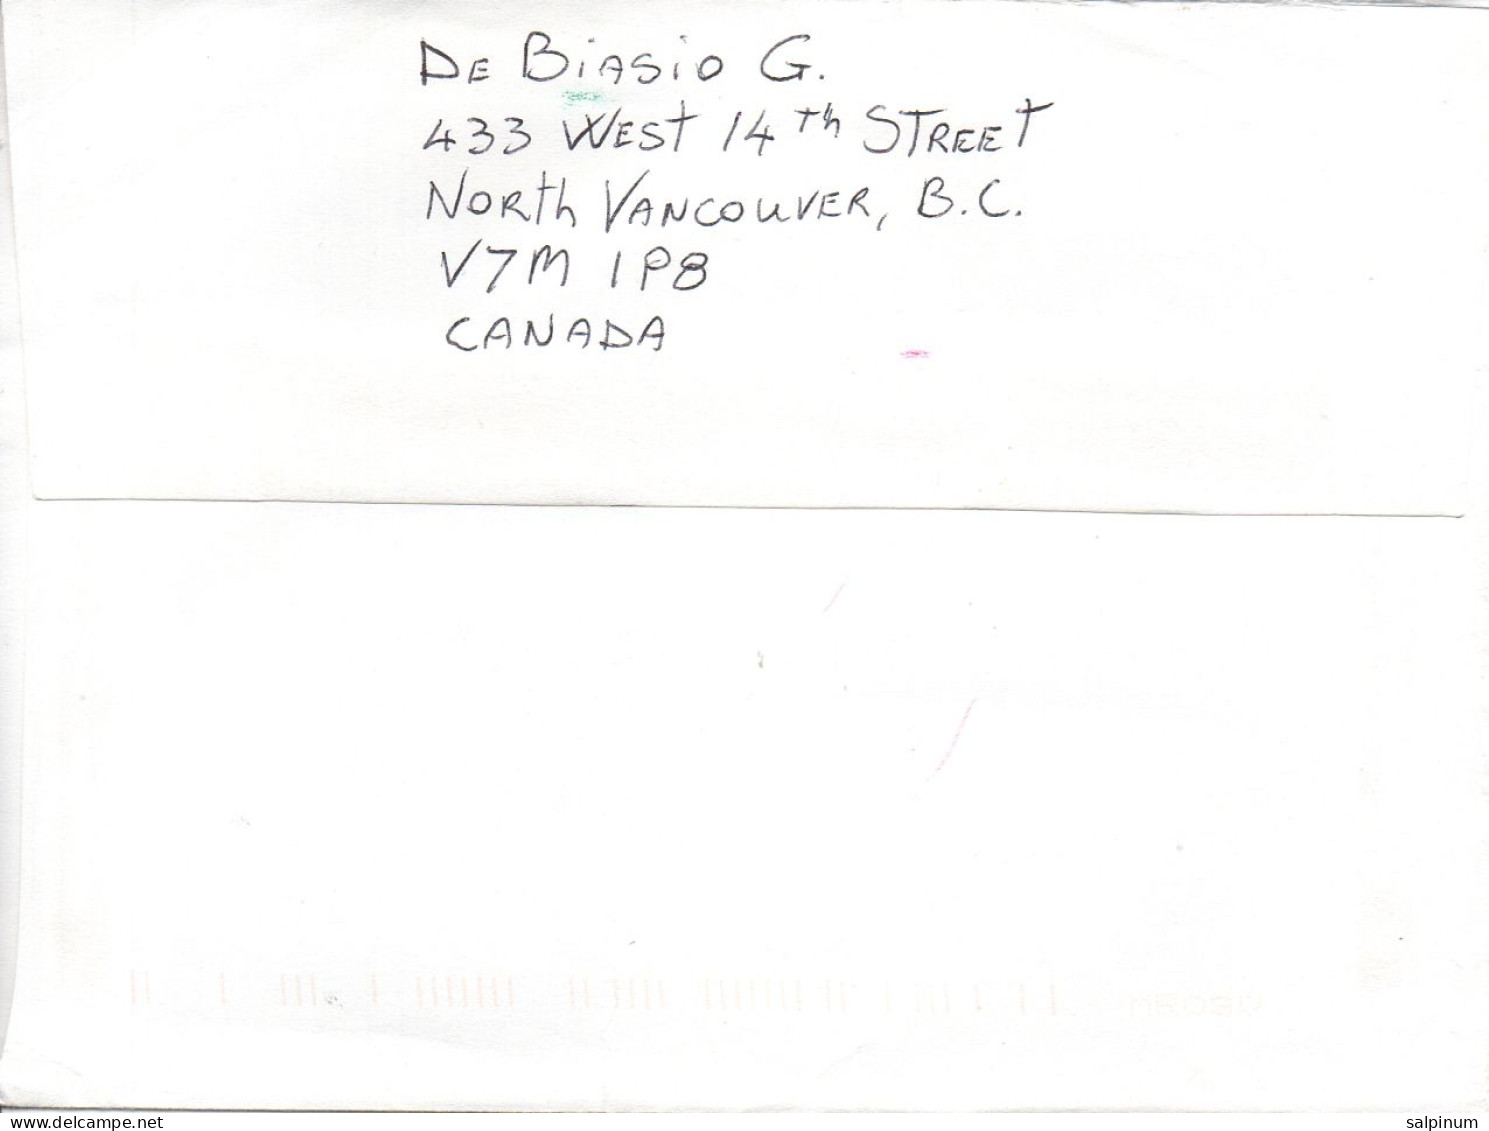 Philatelic Envelope With Stamps Sent From CANADA To ITALY - Briefe U. Dokumente